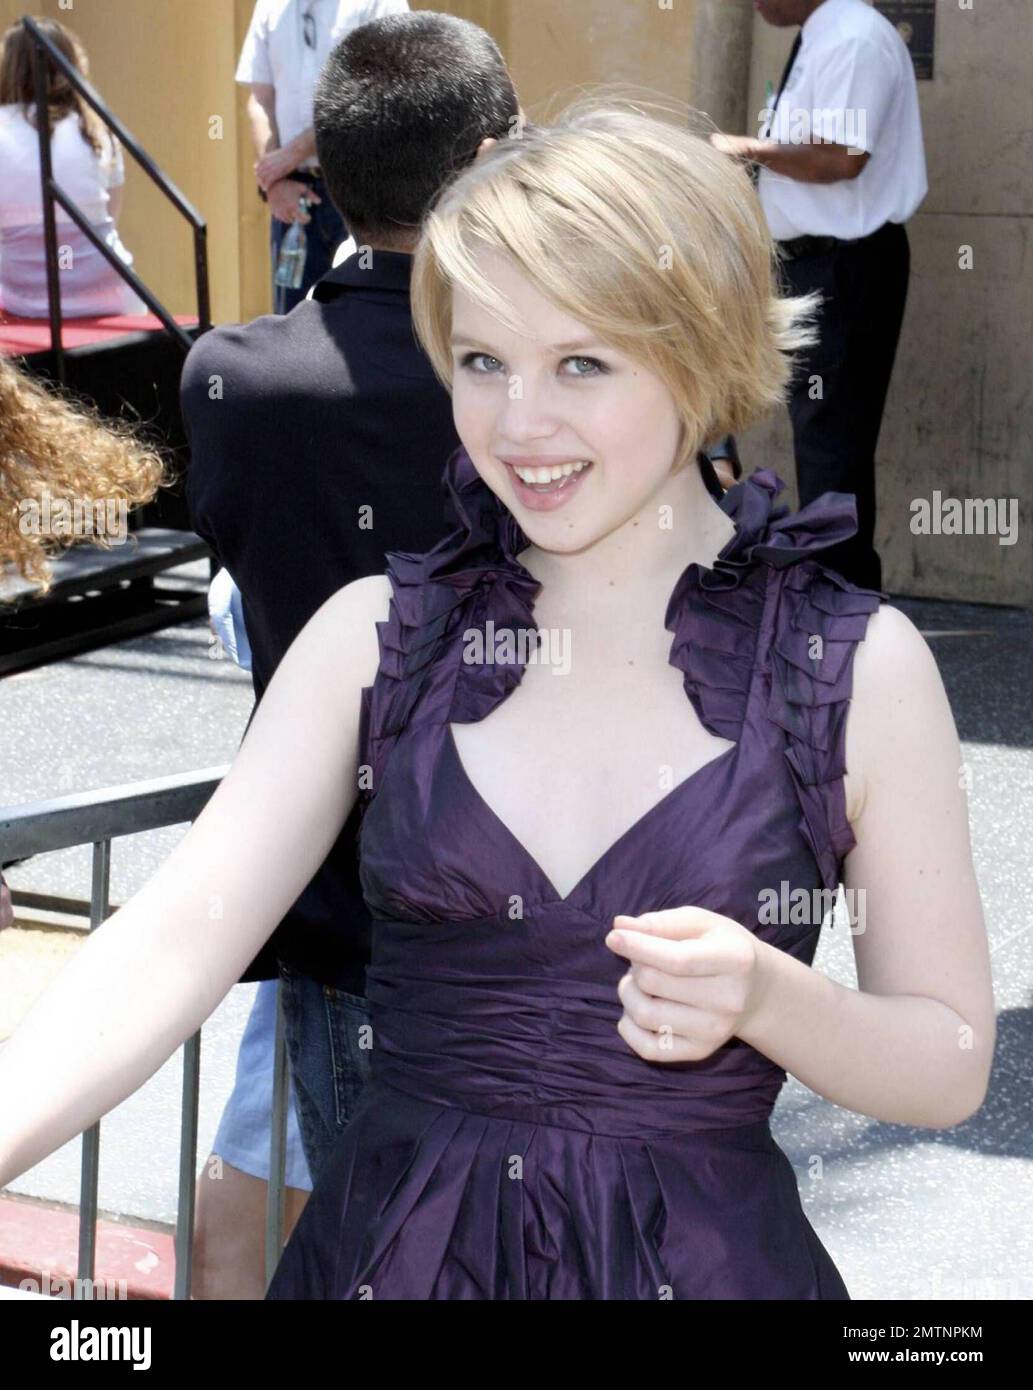 "My Sisters Keeper" and "Medium" star Sofia Vassilieva looks stunning and is all smiles as she attends Cameron Diaz's Walk of Fame Star ceremony in Los Angeles, CA. 6/22/09. Stock Photo